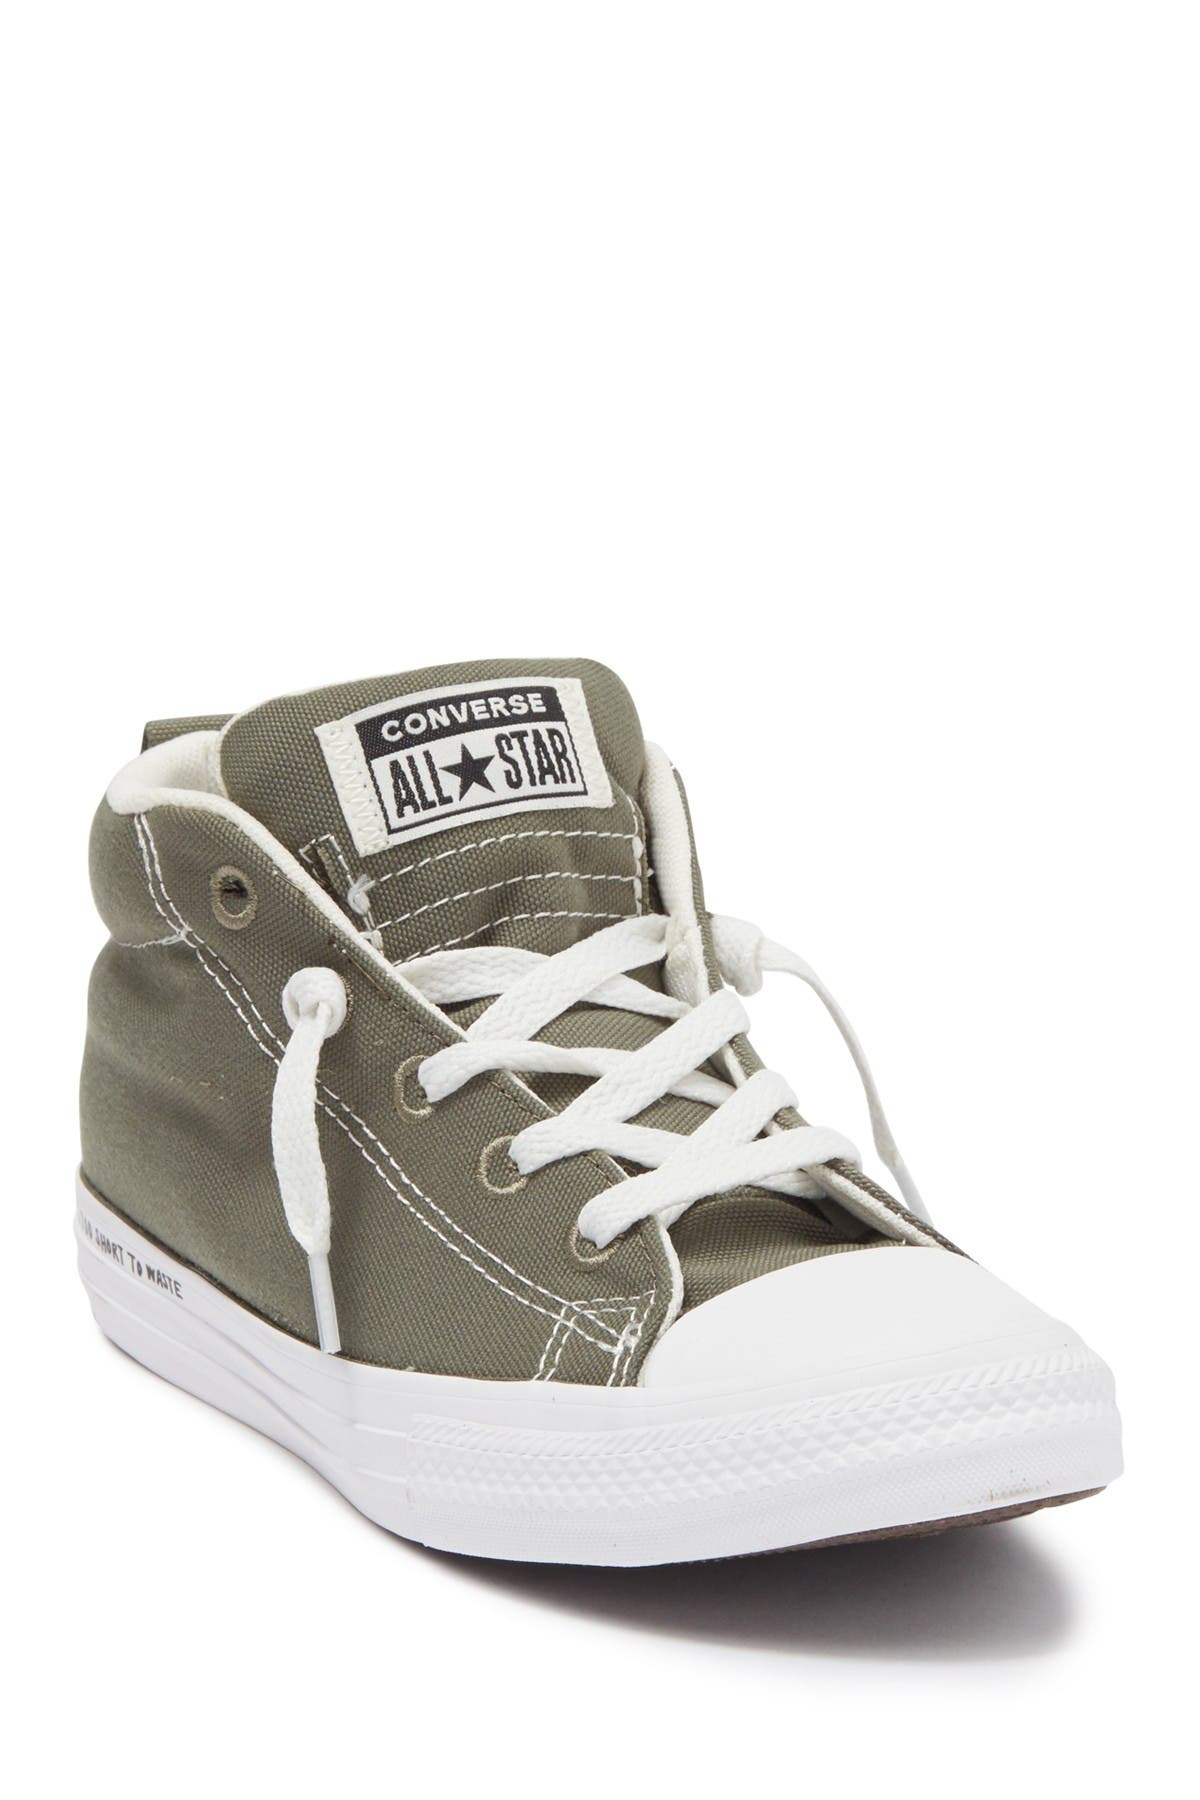 converse chuck taylor all star mid sneaker